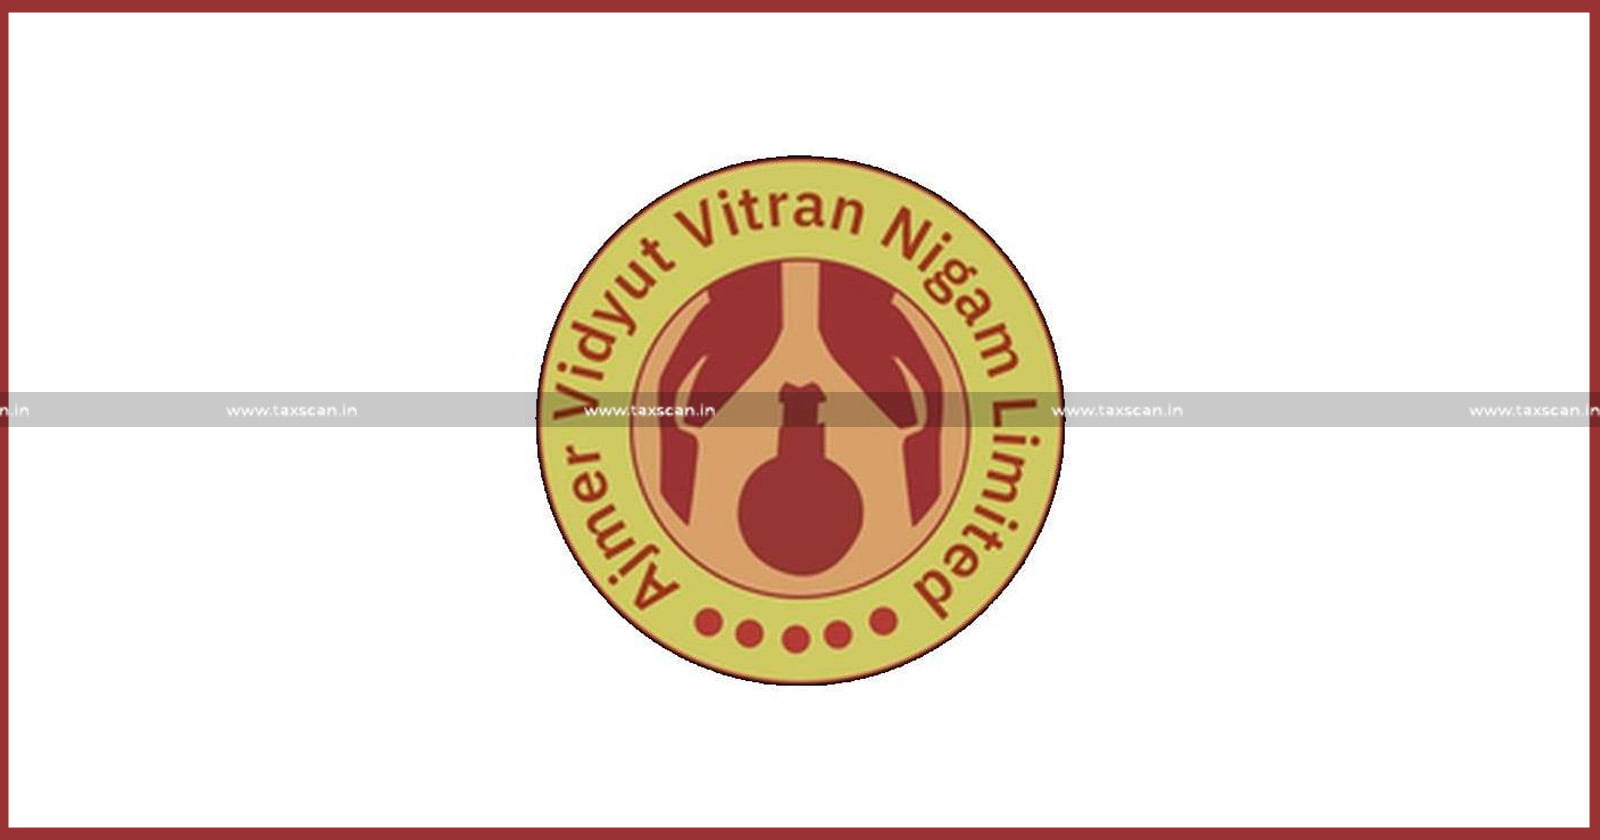 Employees of Ajmer Vidhyut Vitran Nigam - Central Government Employees - ITAT denies Exemption - ITAT - IT Act - taxscanEmployees of Ajmer Vidhyut Vitran Nigam - Central Government Employees - ITAT denies Exemption - ITAT - IT Act - taxscan